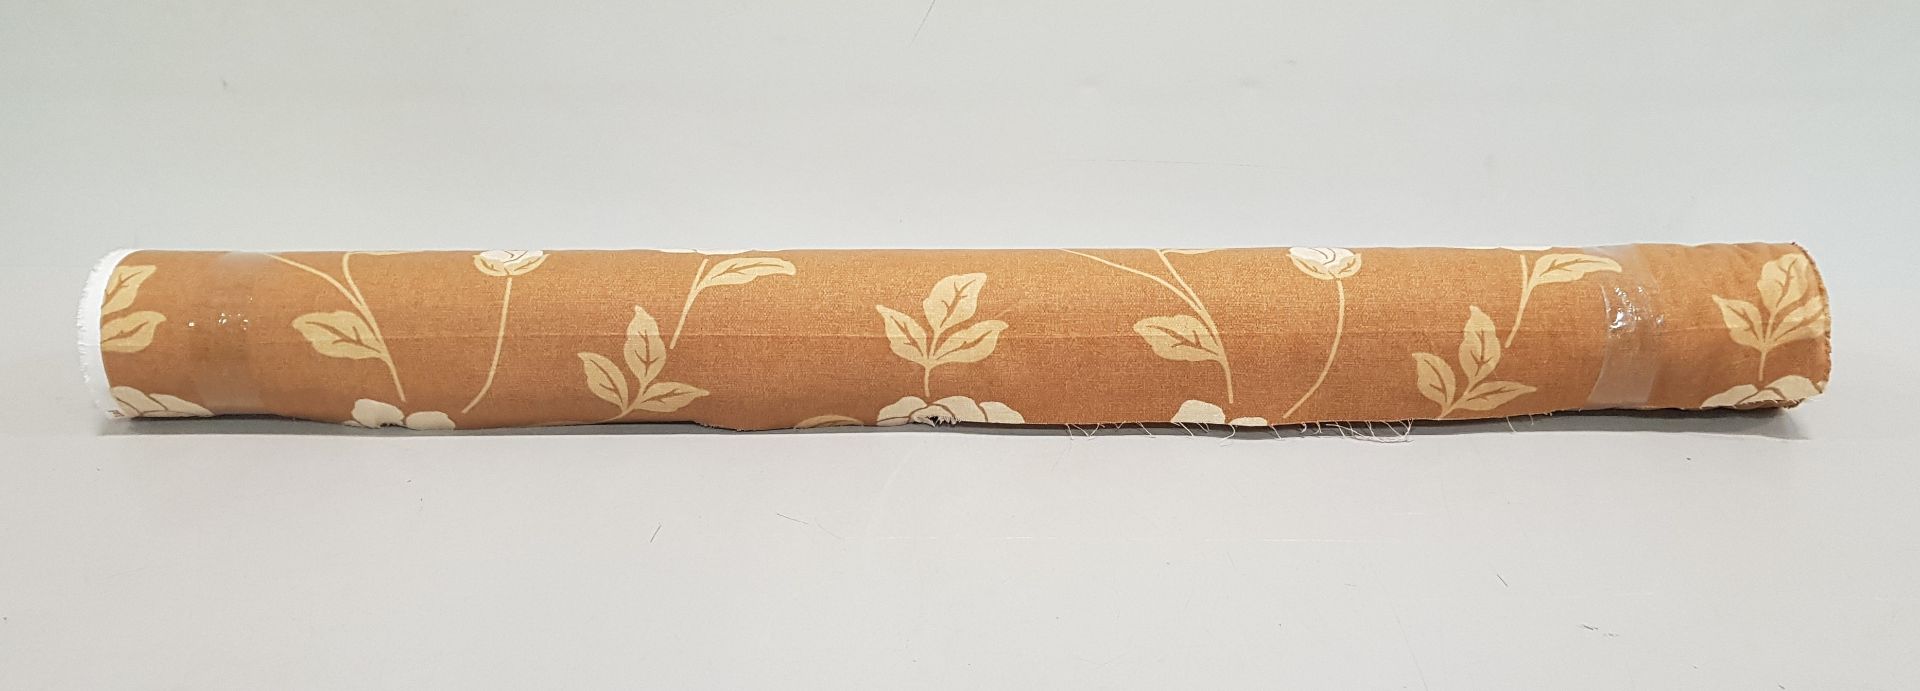 1 X ROLL OF FABRIC IN BROWN AND WHITE FLORAL DESIGN - THE LENGTH 31M - £12.99 / M - TOTAL £402.69